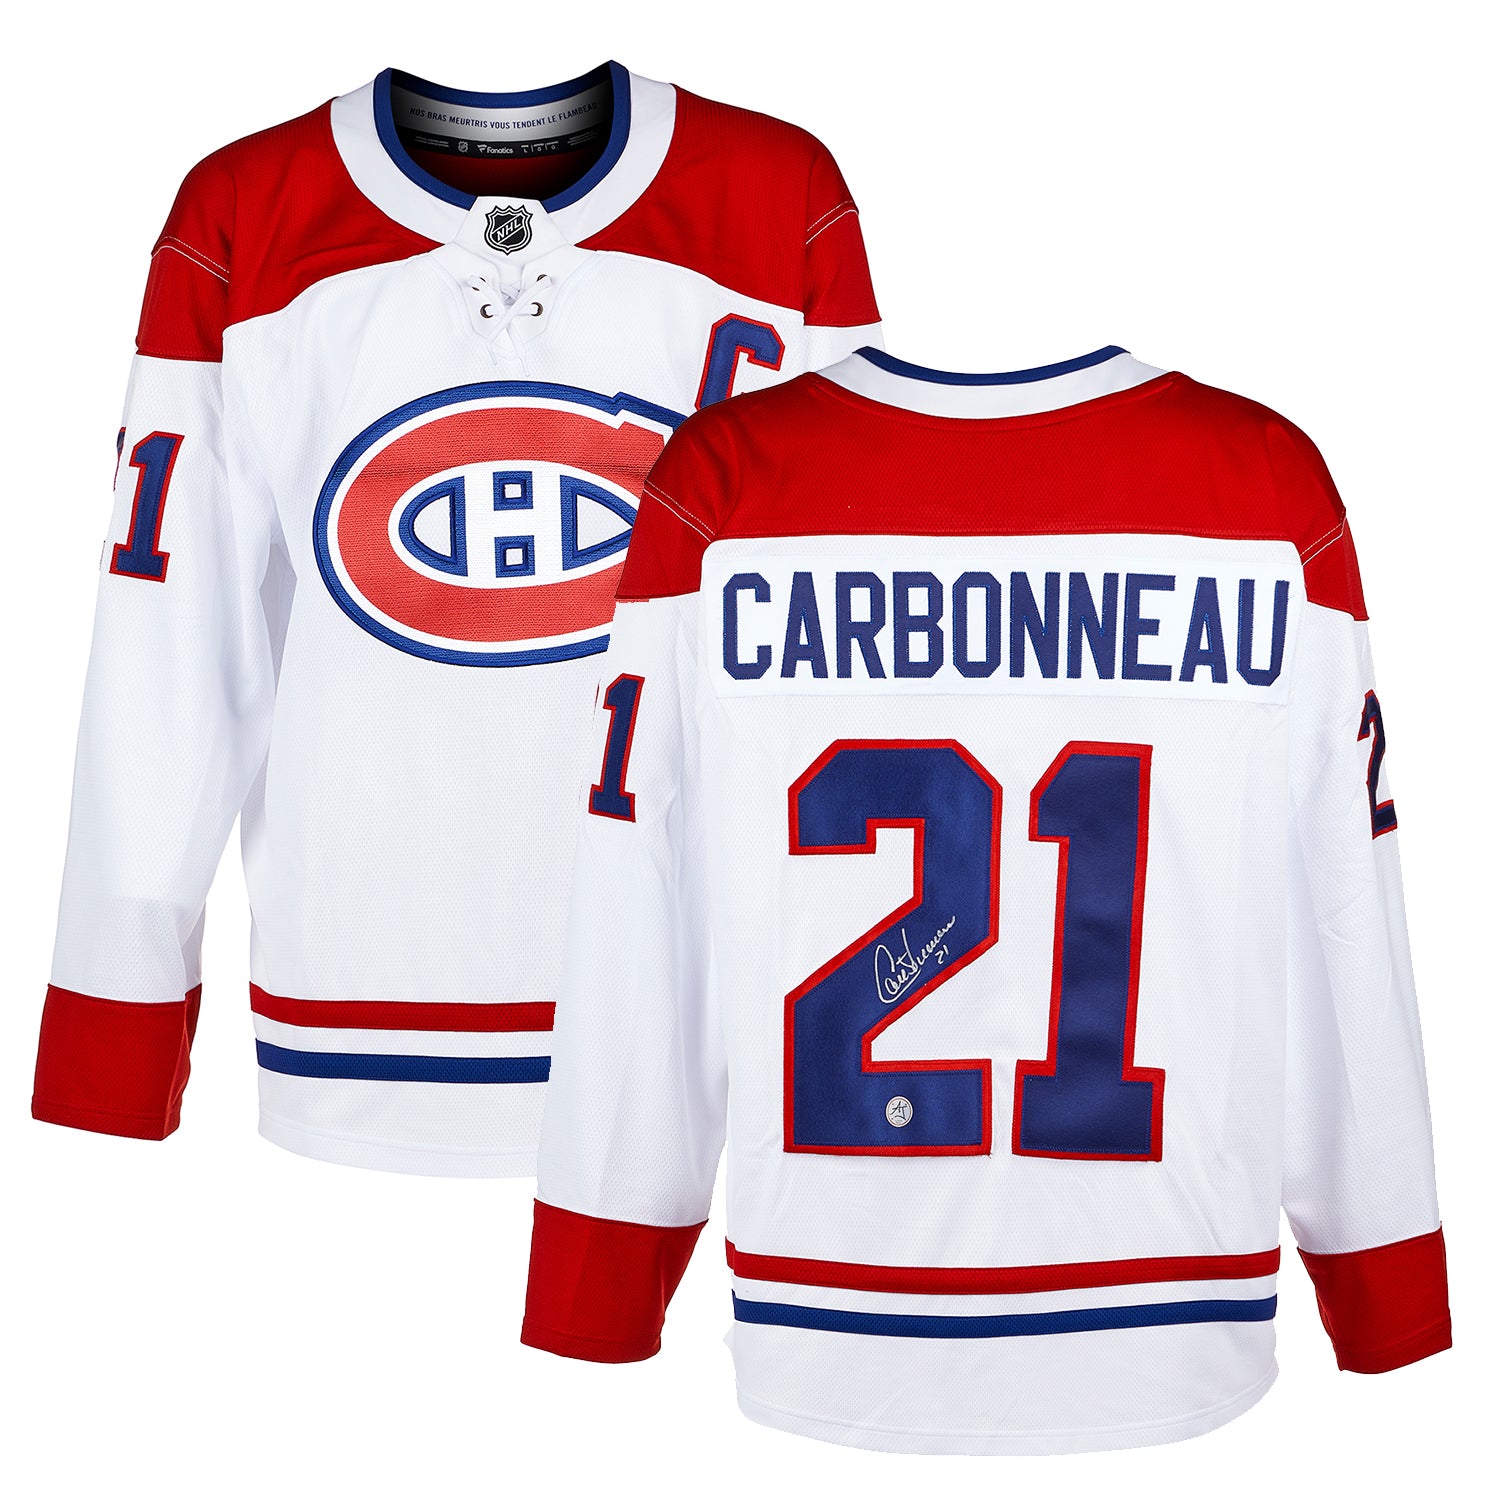 Guy Carbonneau Signed Montreal Canadiens White Fanatics Jersey